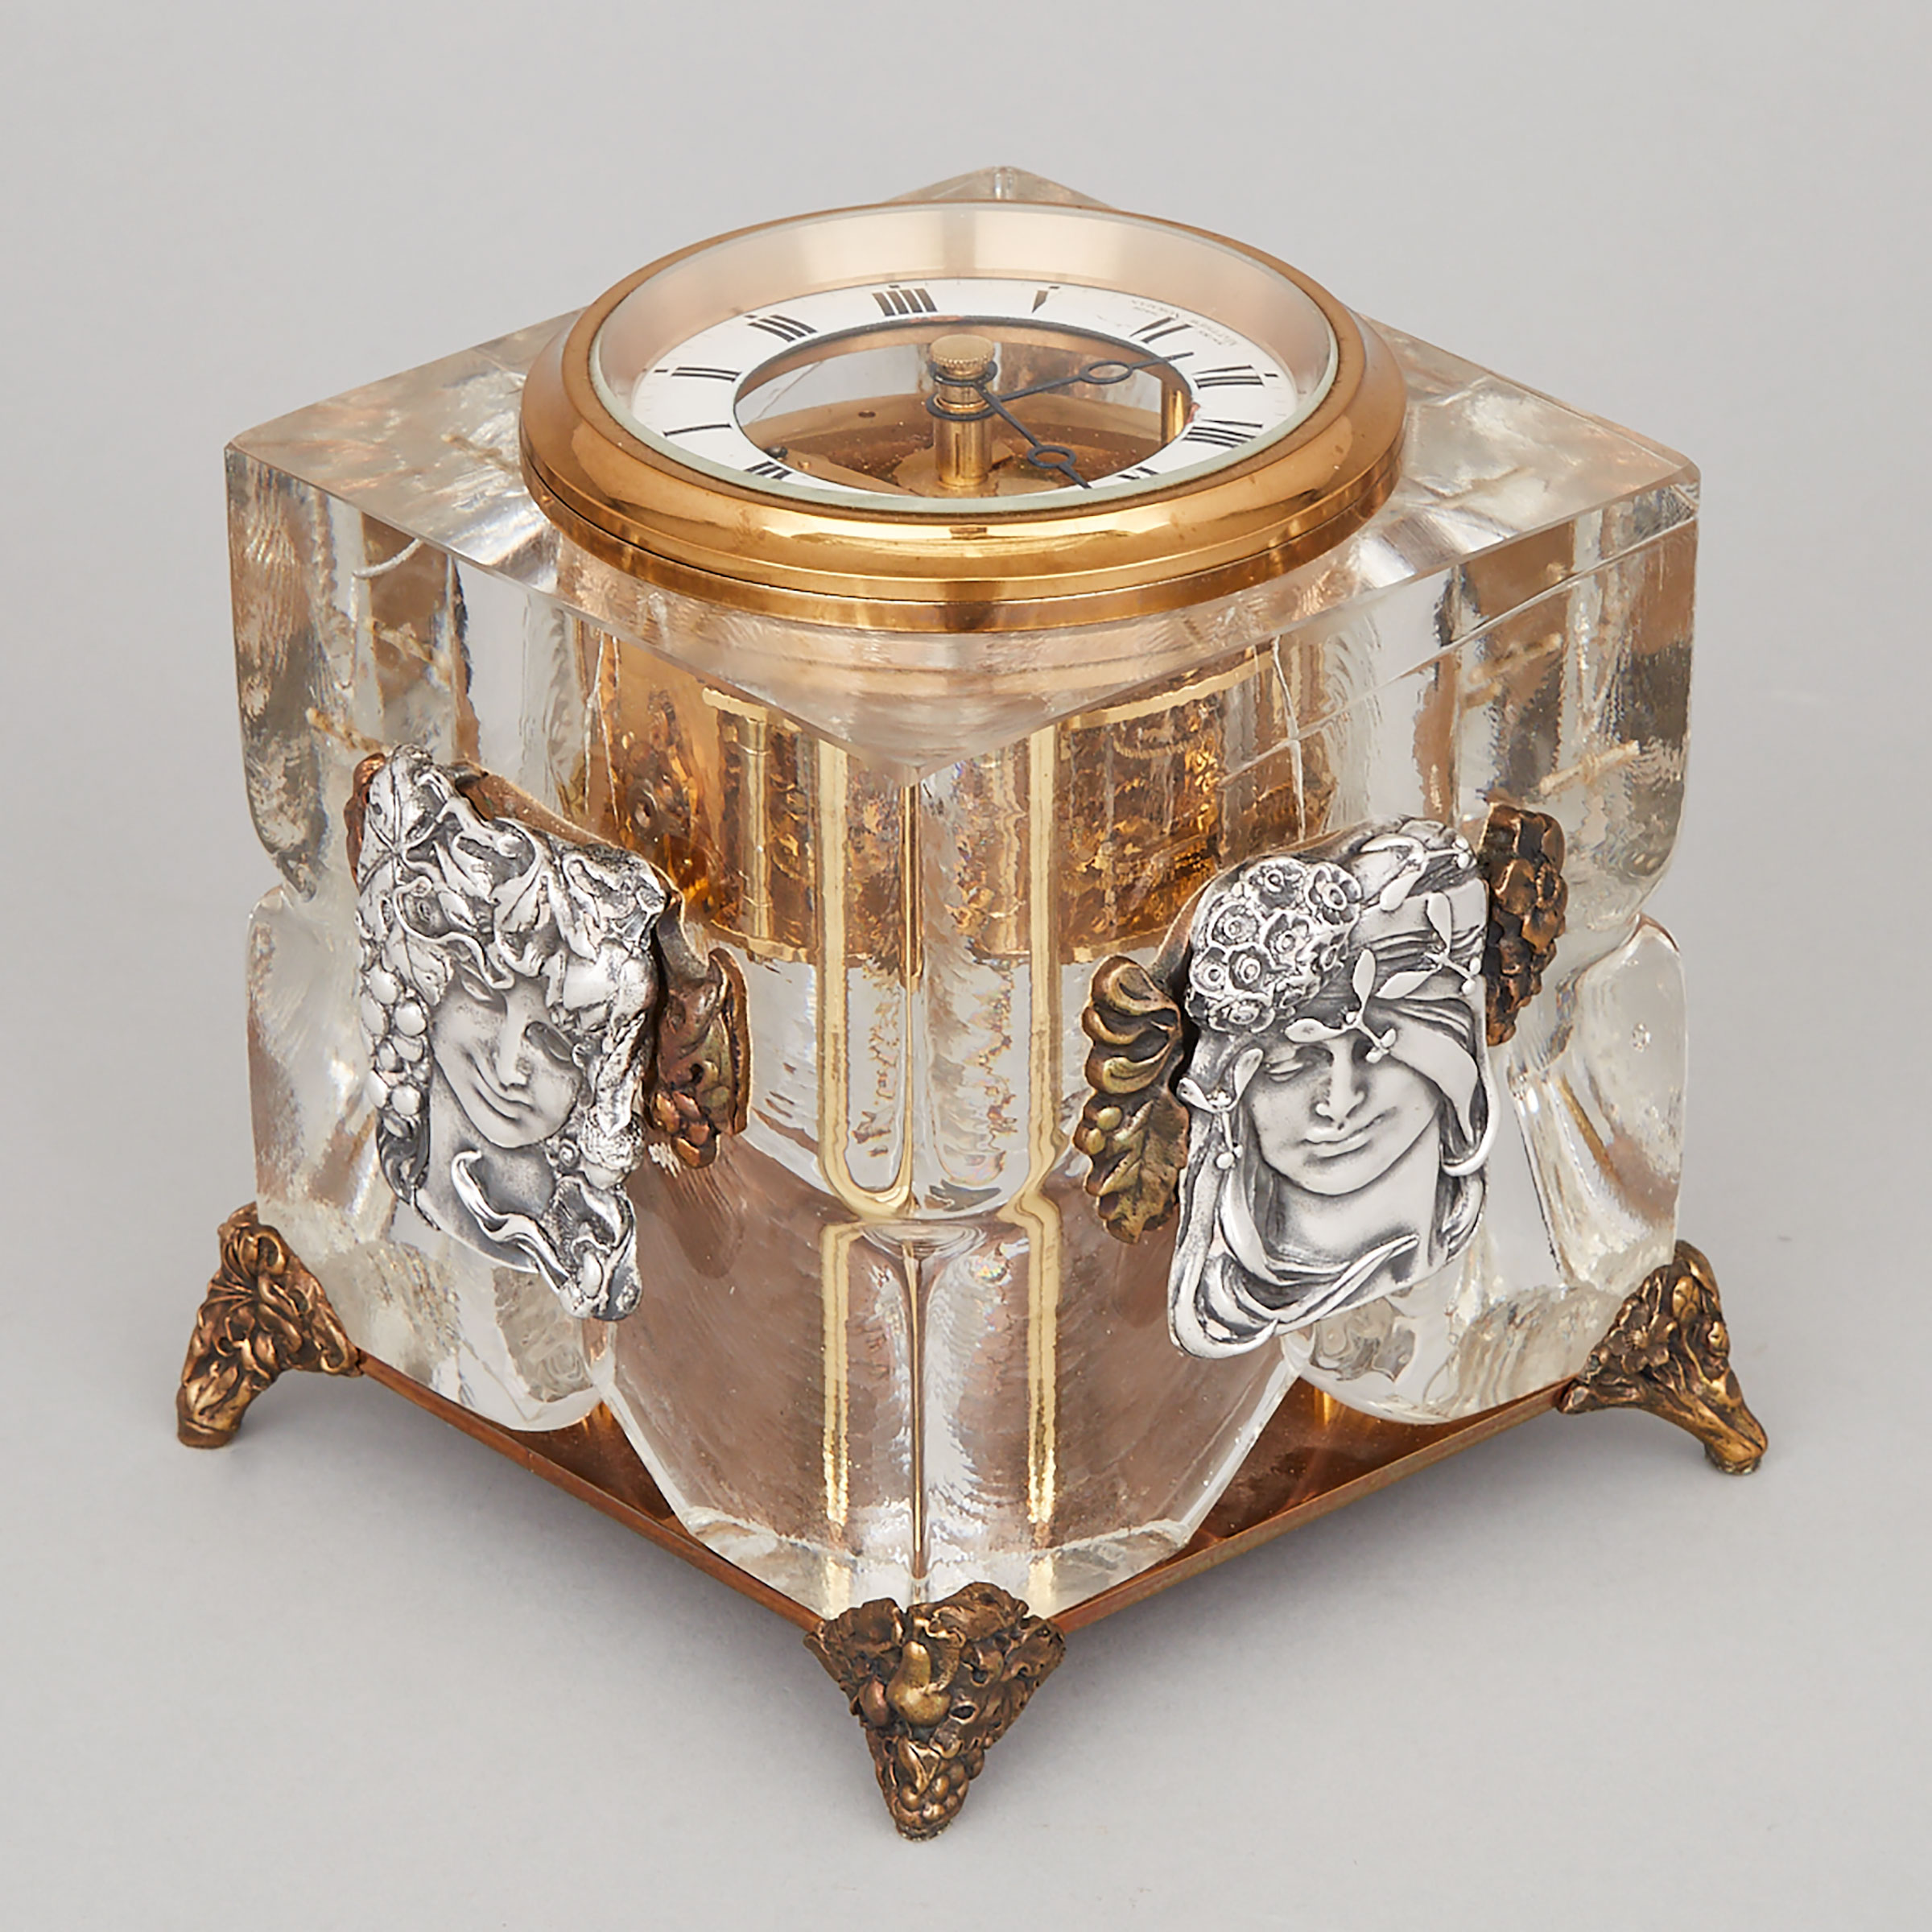 Swiss Silver and Bronze Mounted Glass ‘Four Seasons’ Table Clock by Matthew Norman, late 20th century